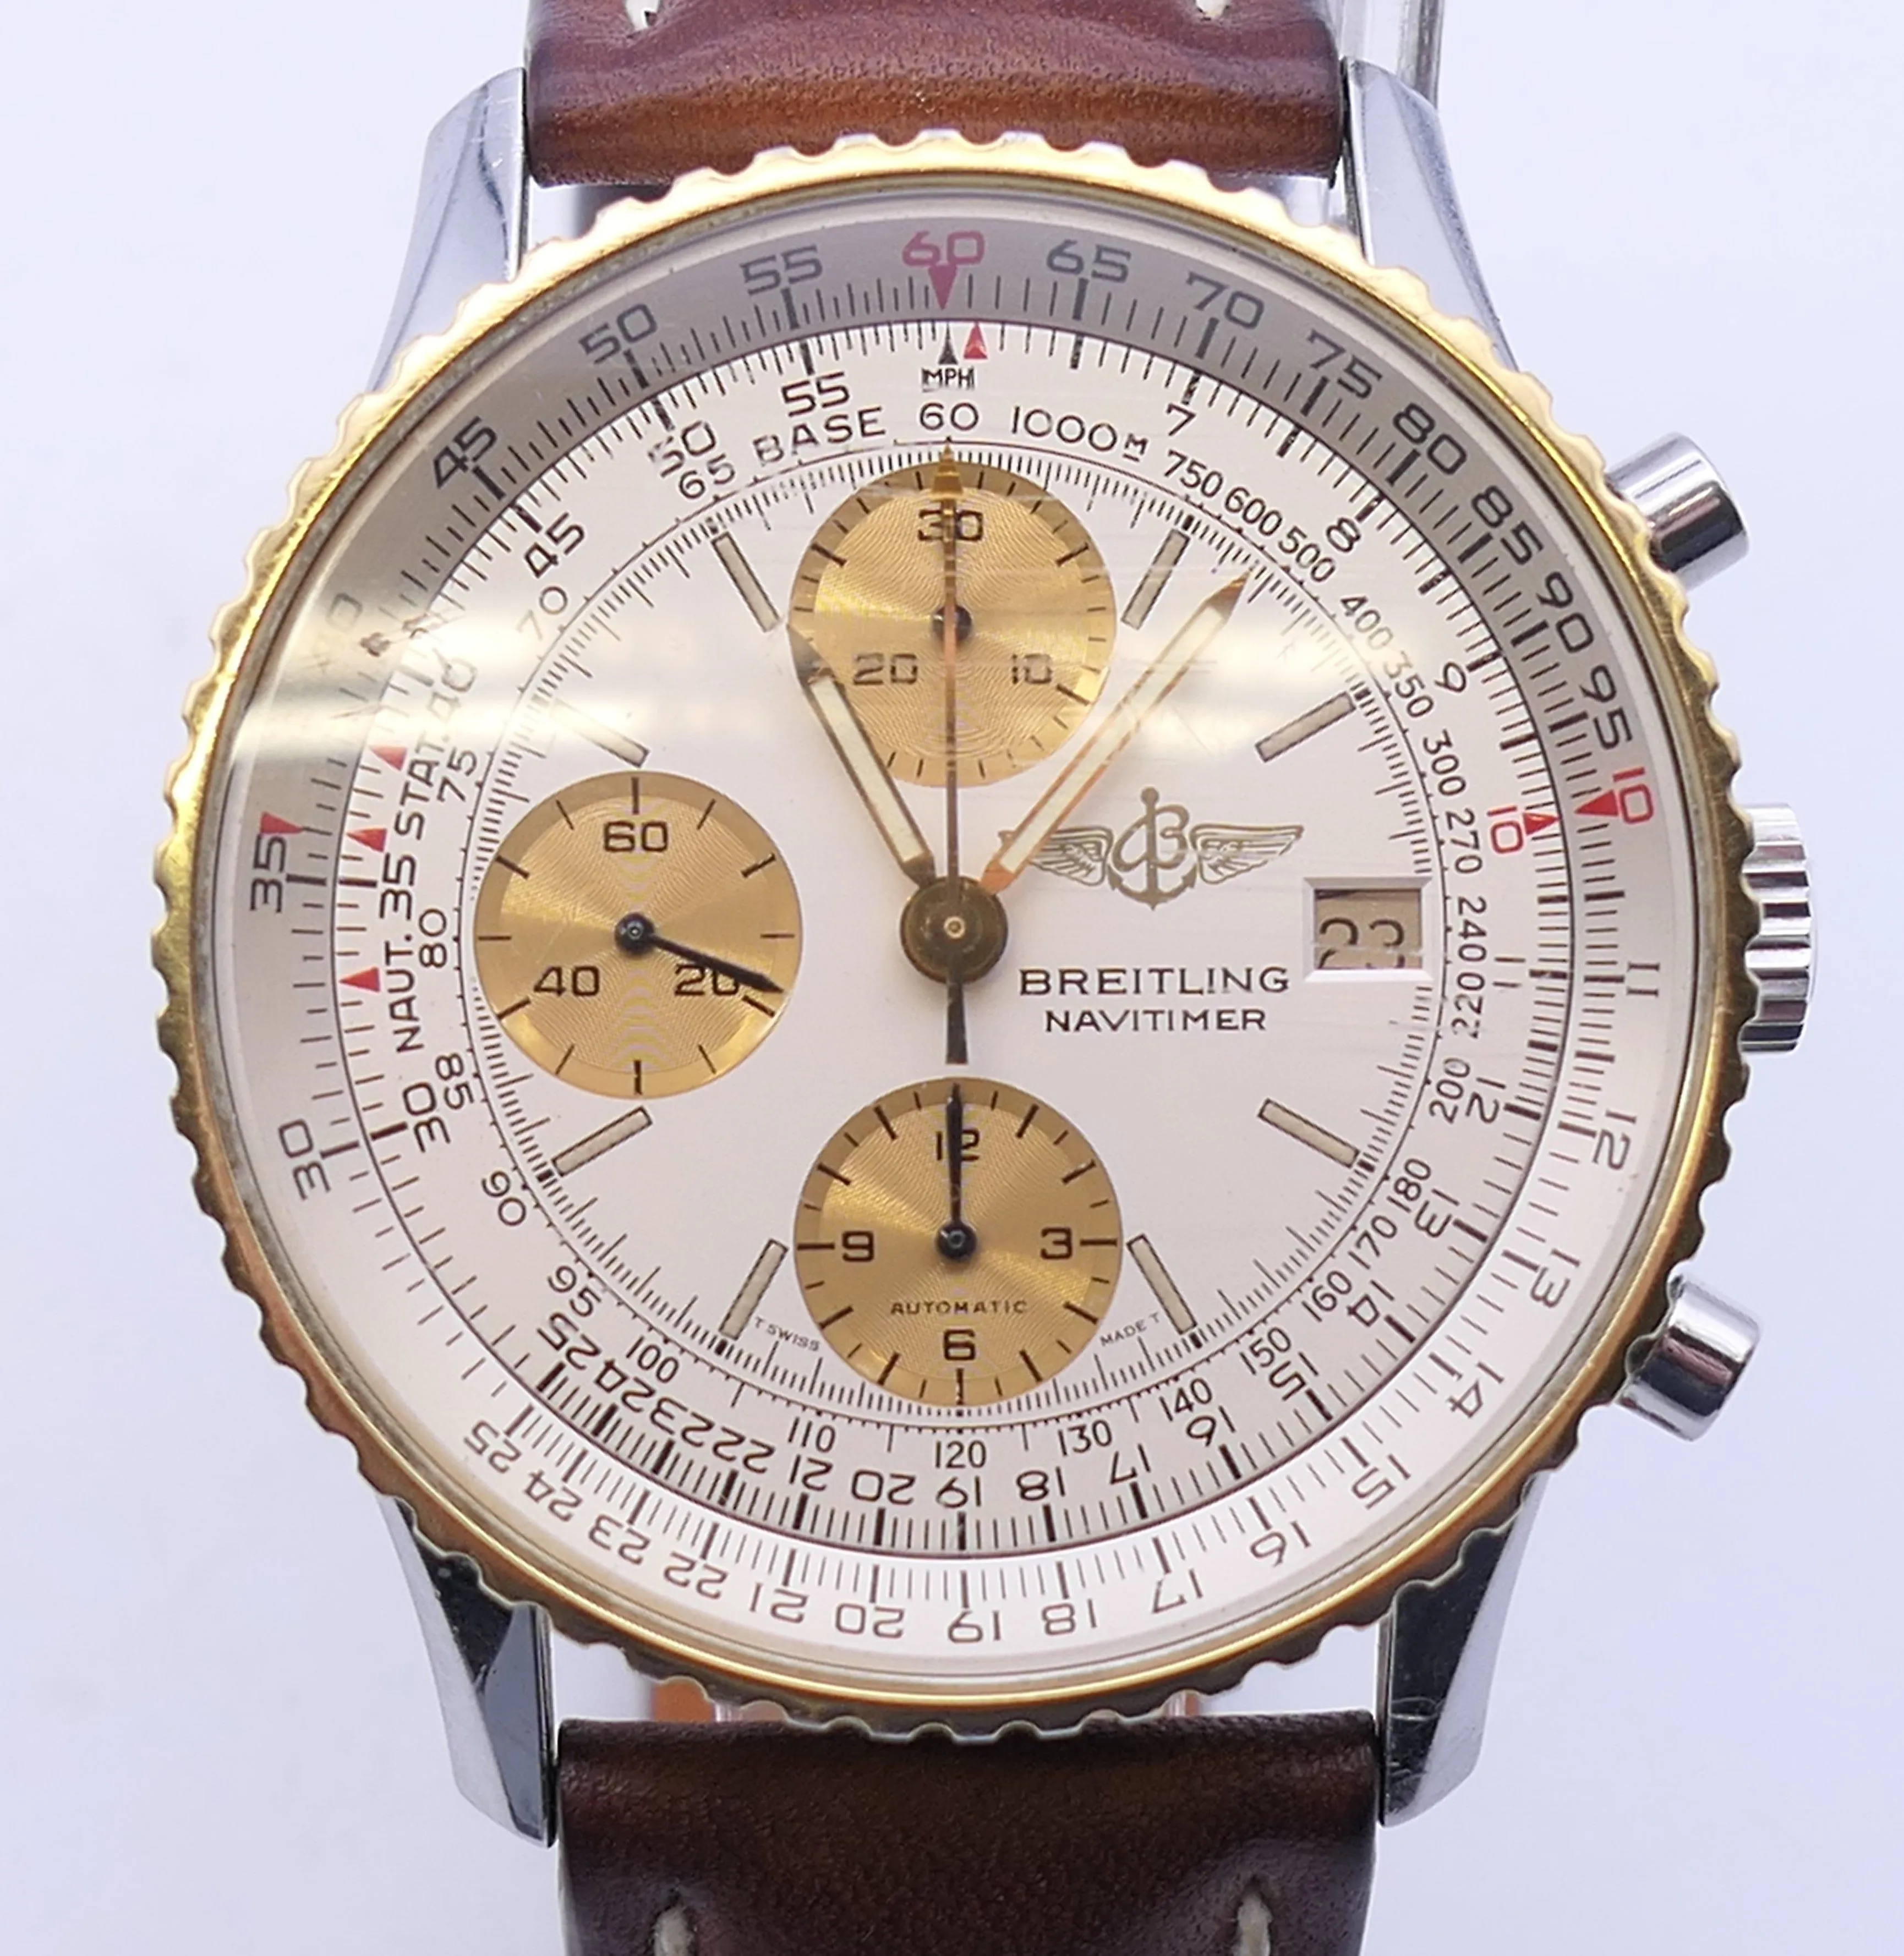 Breitling Navitimer 81610 40mm Yellow gold and stainless steel White